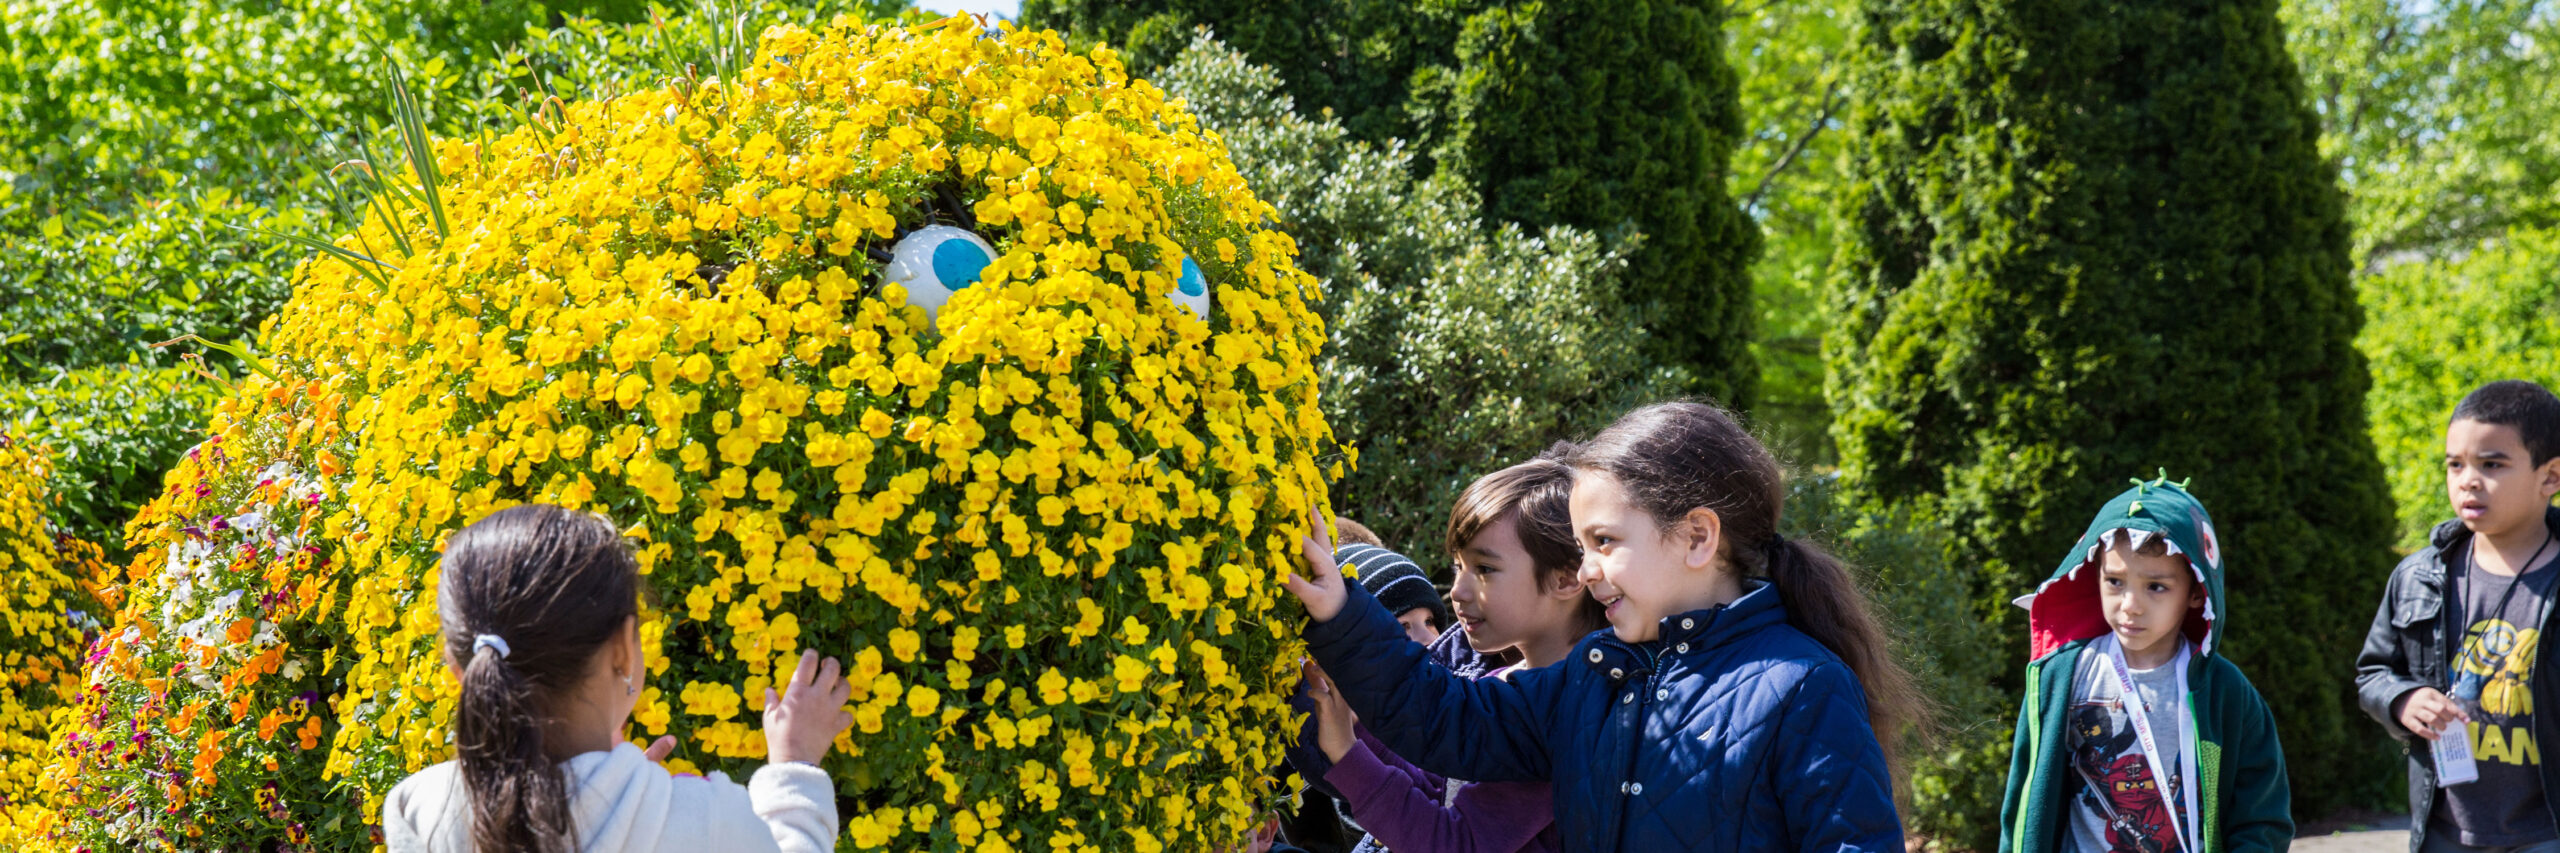 Children interacting with small yellow flowers on topiary wo